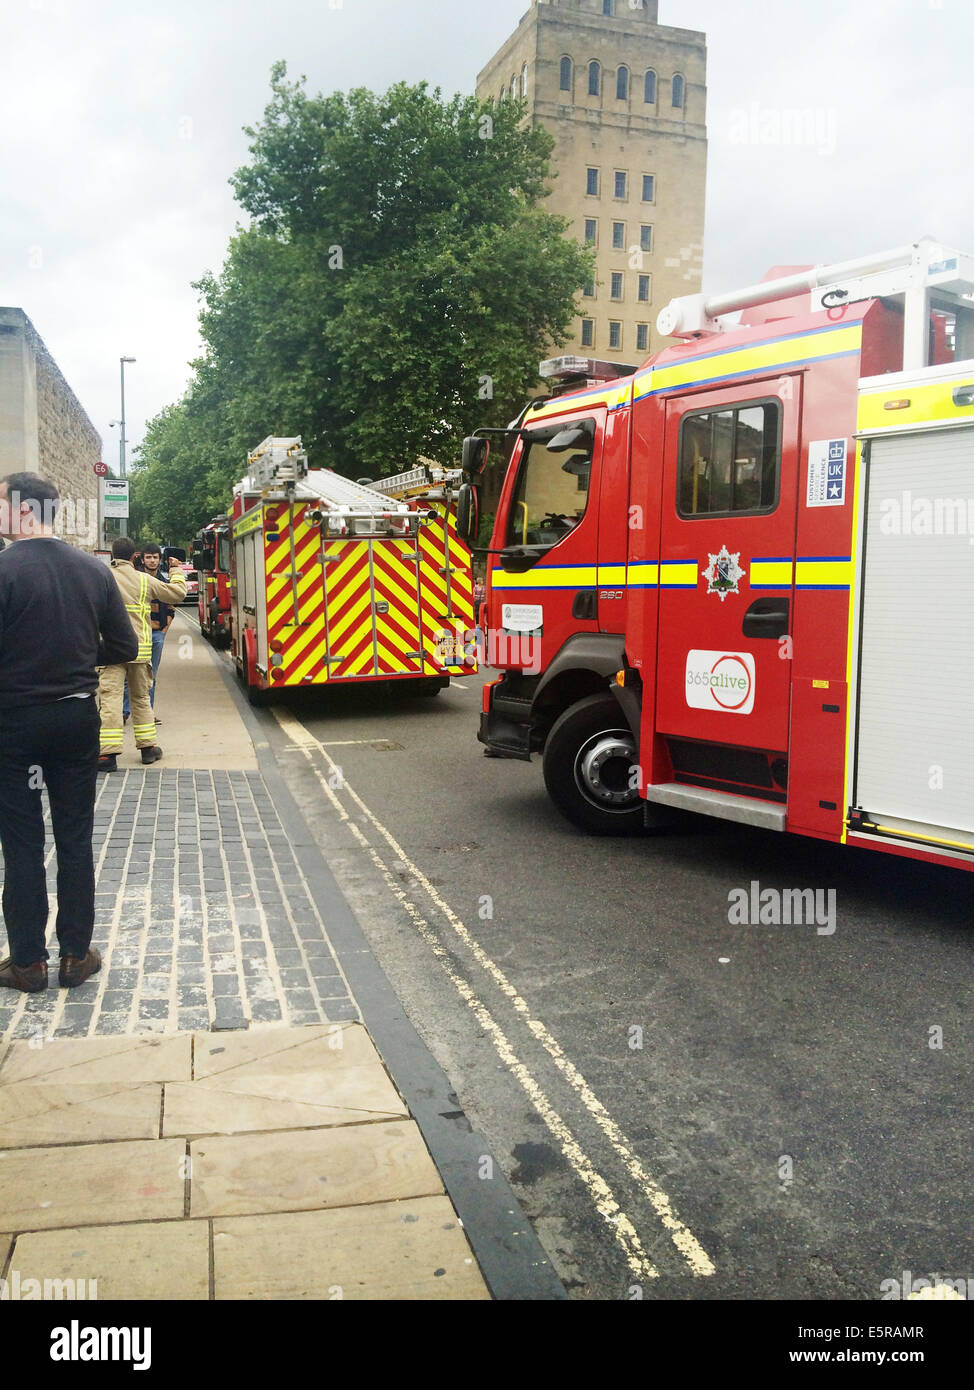 Oxford, Oxfordshire, UK. 5th August, 2014. A small fire broke out in the Malmaison Hotel in Oxford. The Castle Quarter was cordoned off. The Hotel says everything is ok and the fire is now out. Credit:  Annabel Dixon/Alamy Live News Stock Photo